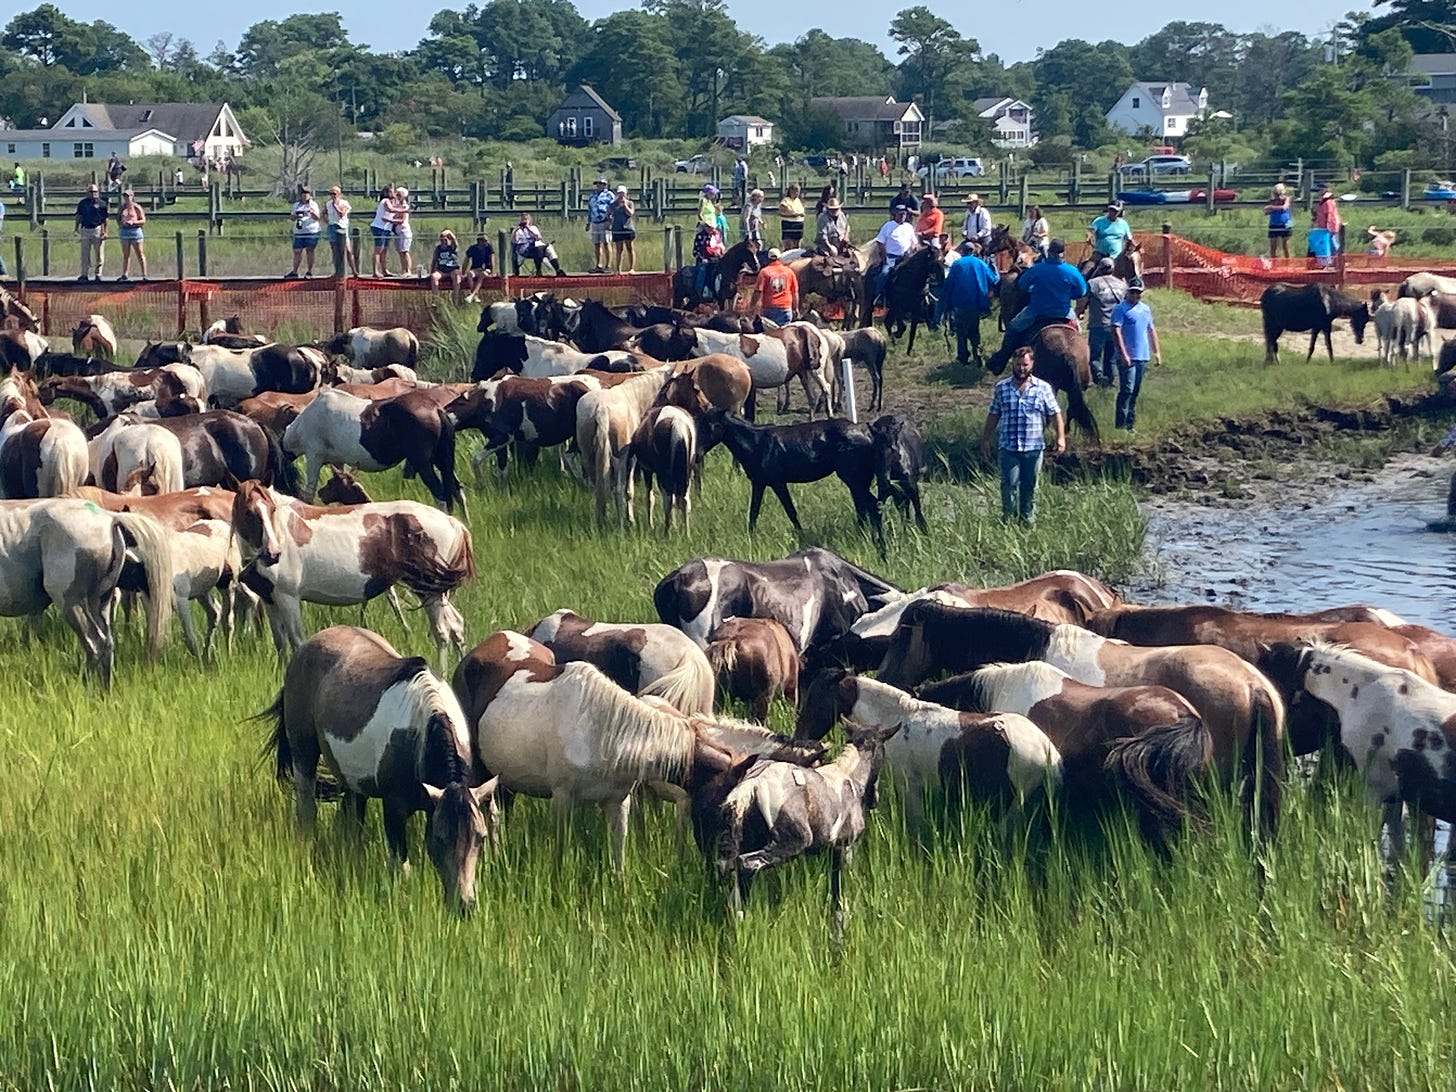 A small herd of ponies, surrounded by people, grazing in marsh grass on the edge of a body of water. 